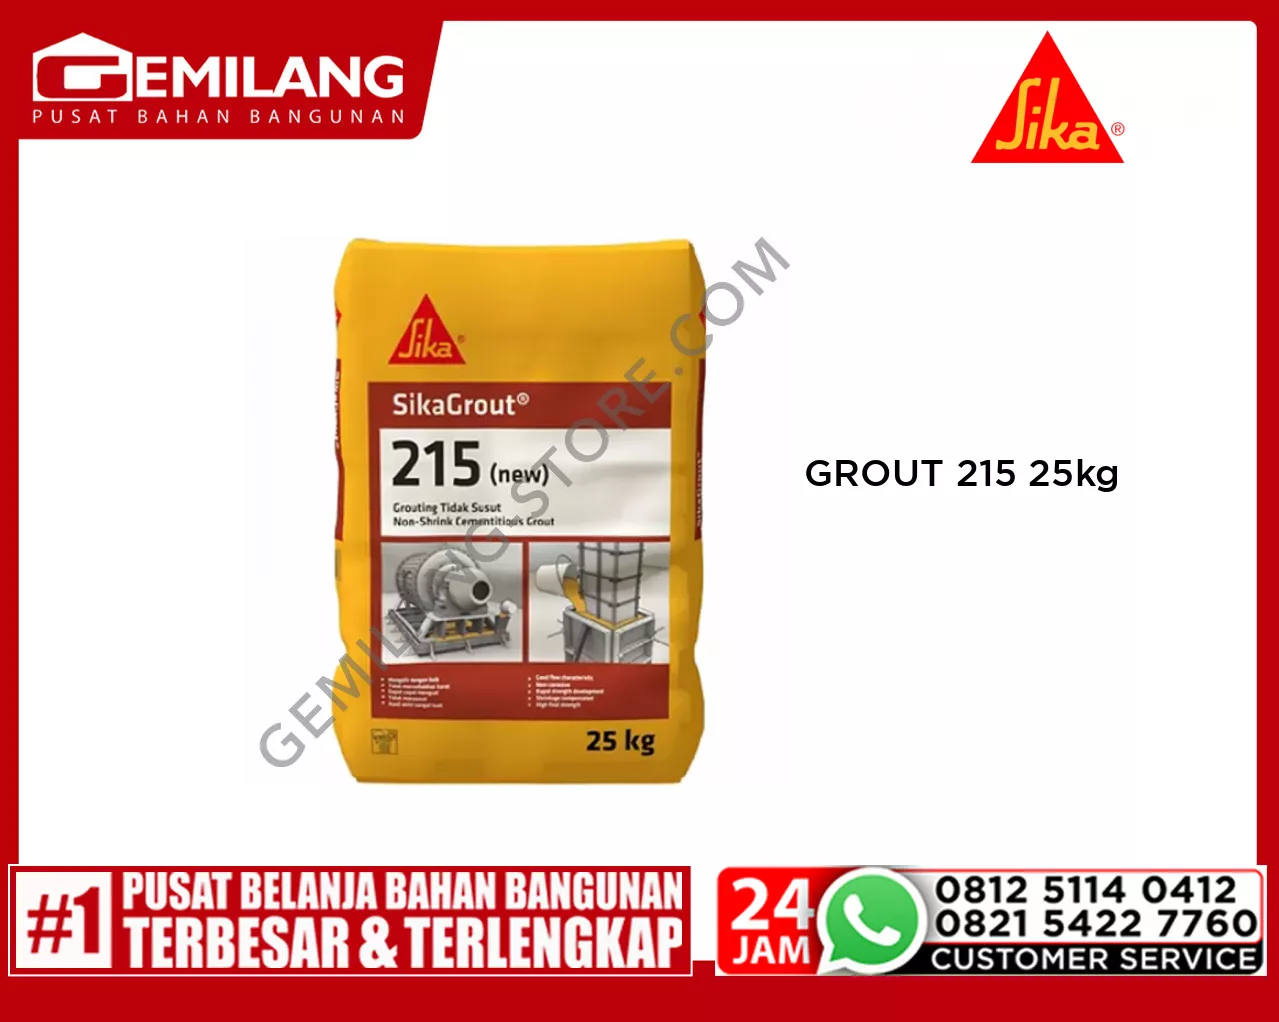 SIKA GROUT 215 @25kg